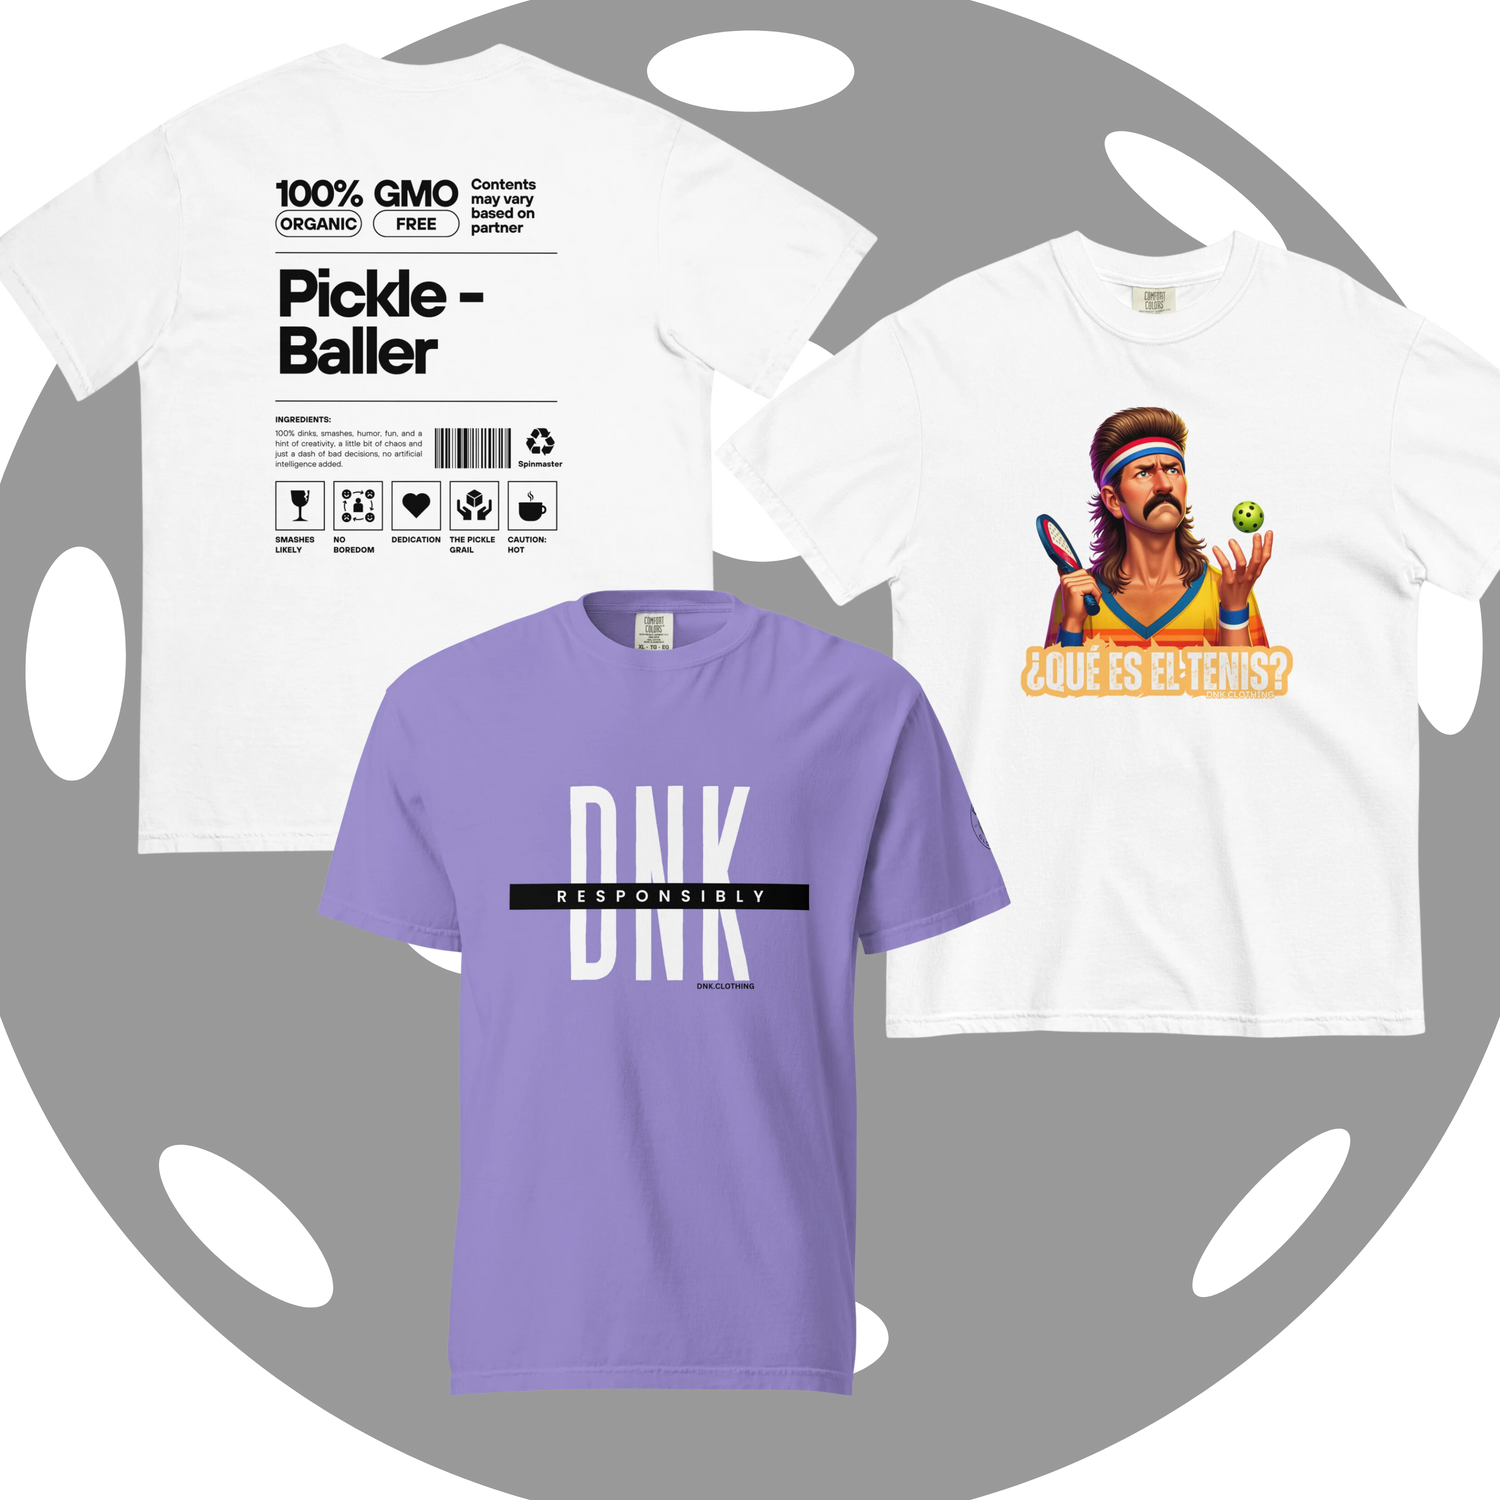 Assortment of DNK pickleball-inspired tees in vibrant colors displayed on a wooden rack, showcasing the latest trends in athletic wear with bold designs and sporty chic aesthetics.